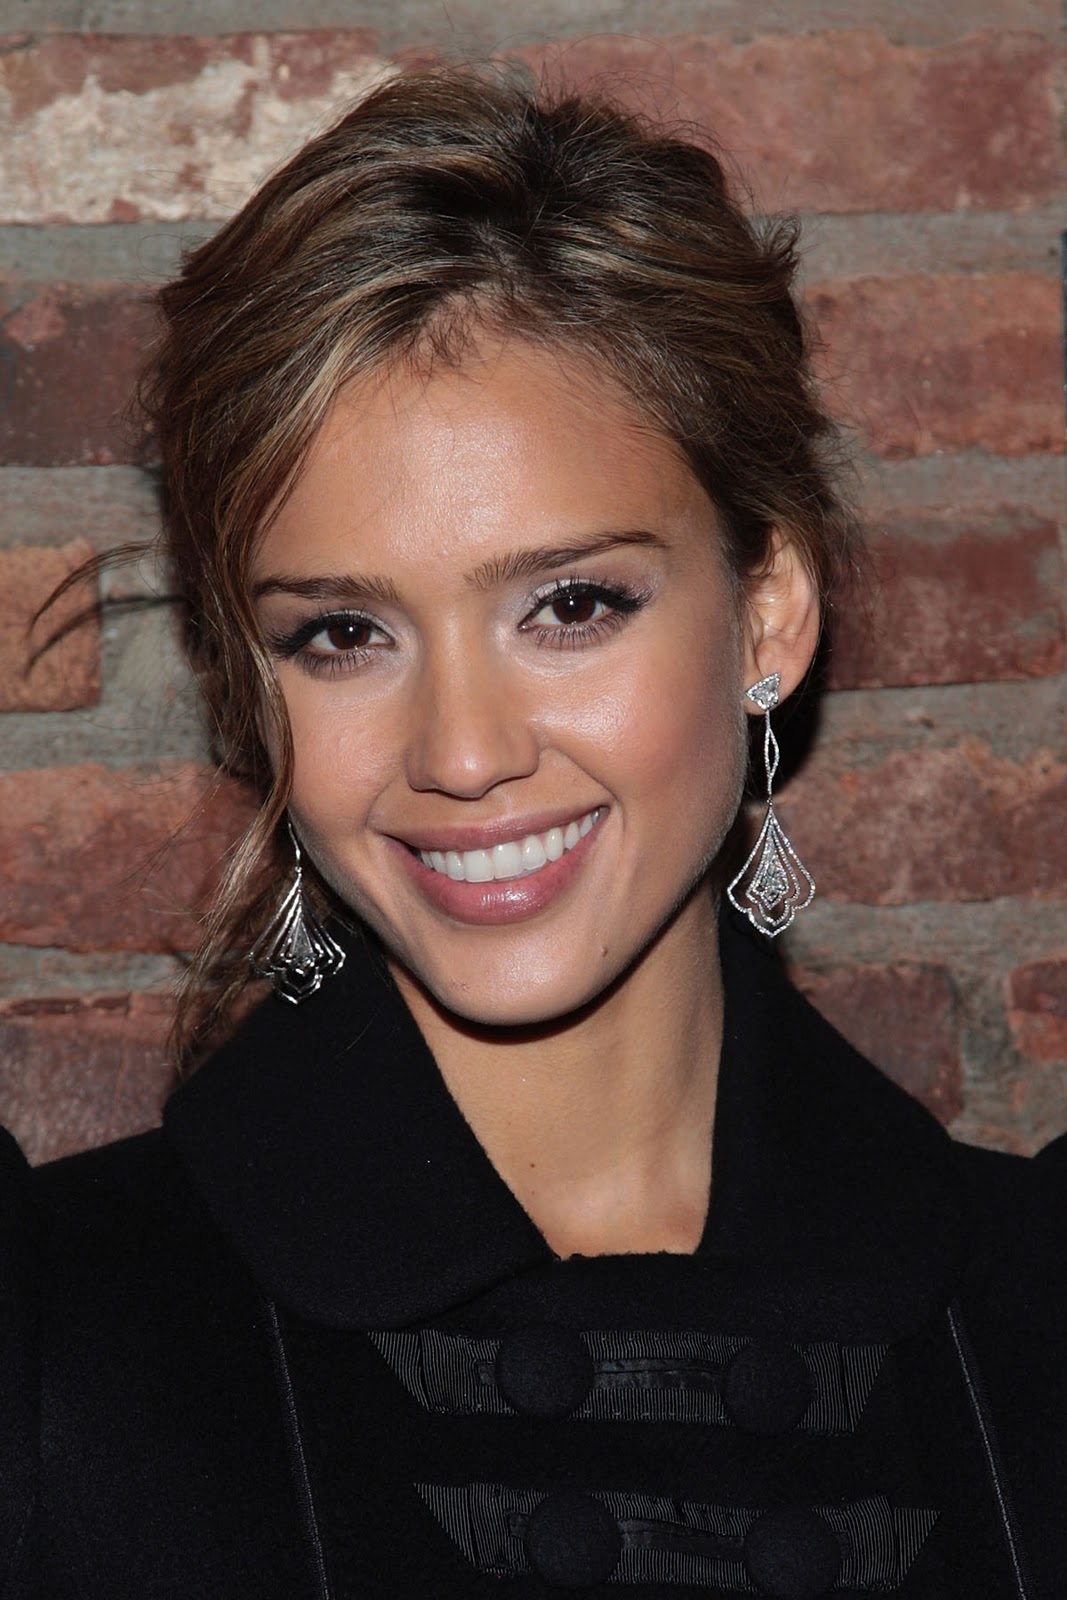 JESSICA-ALBA-NEW-LATEST-HOT-HAIR-STYLE-PICTURES-PHOTOSHOOT%2B-JESSICA ...